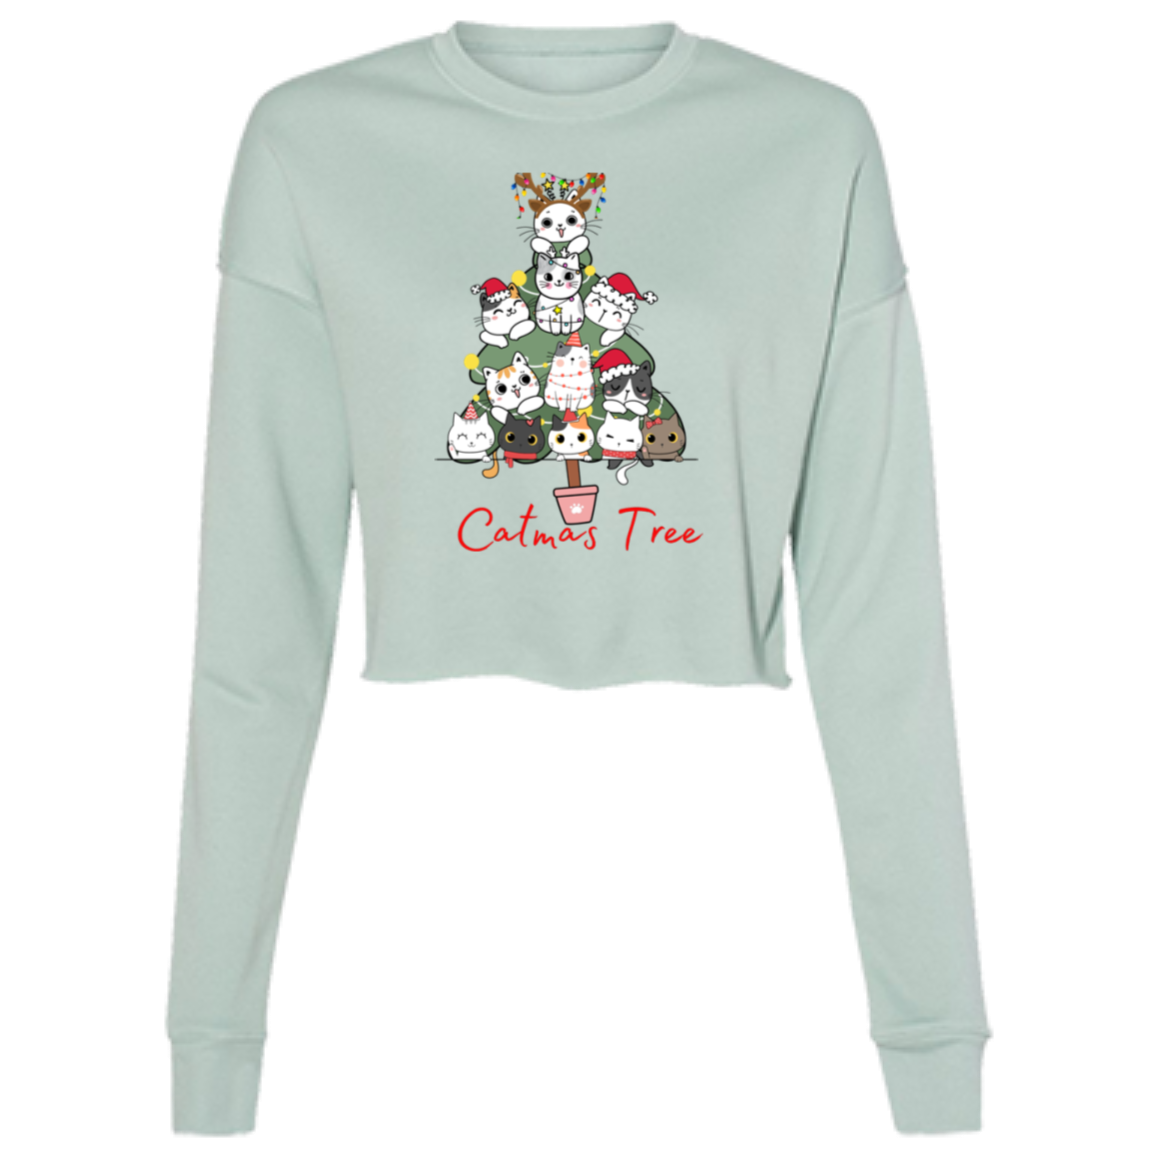 CatMas Tree for Crazy Cat Lady Cropped Fleece